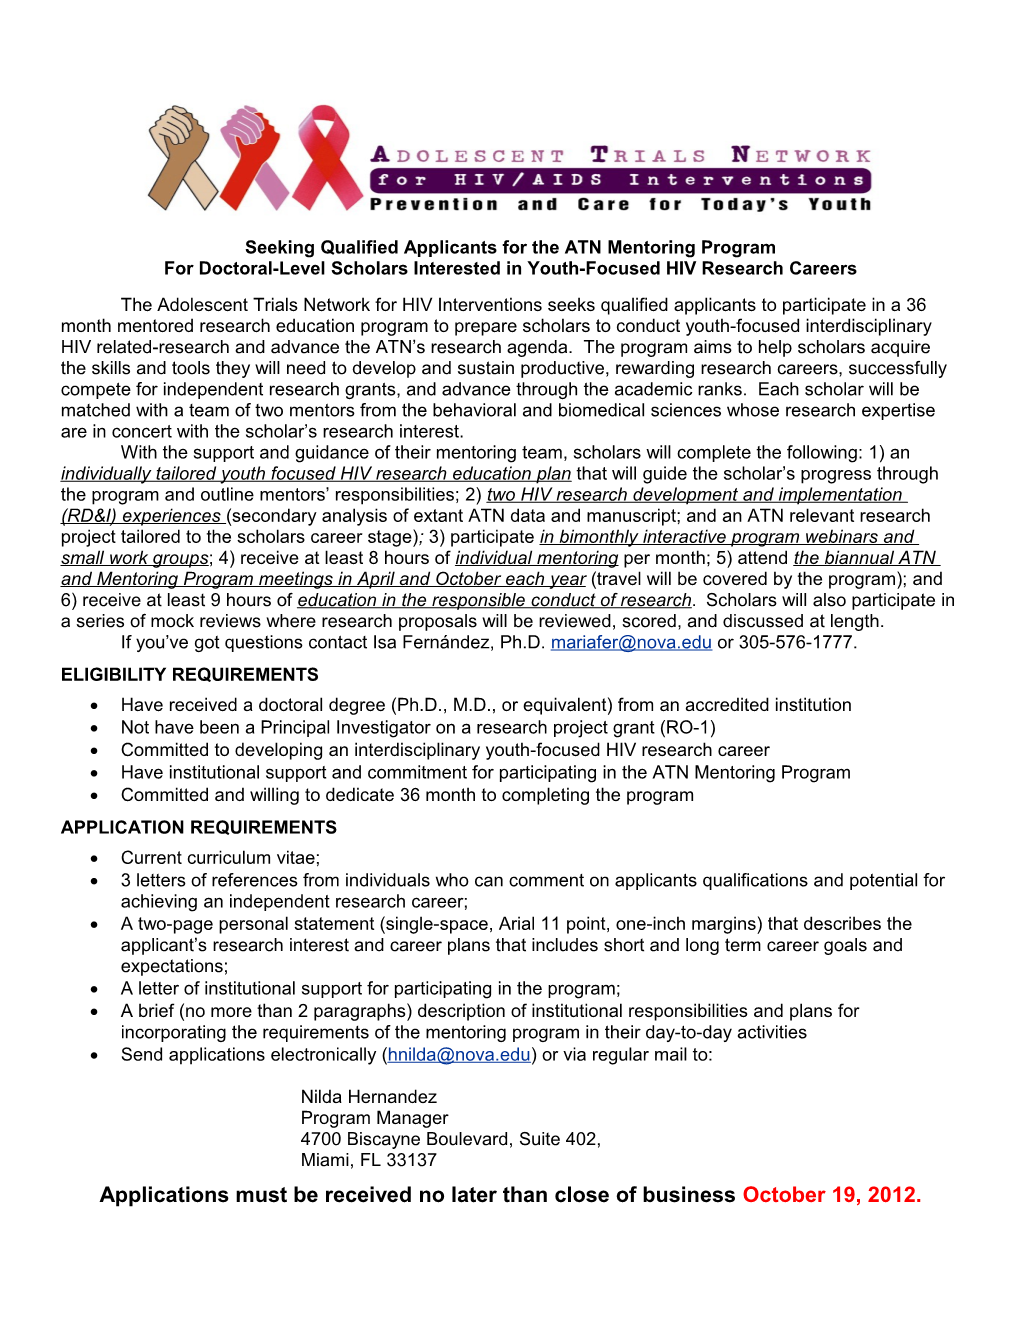 The American Psychological Association (APA) Office on AIDS Seeks Qualified Applicants